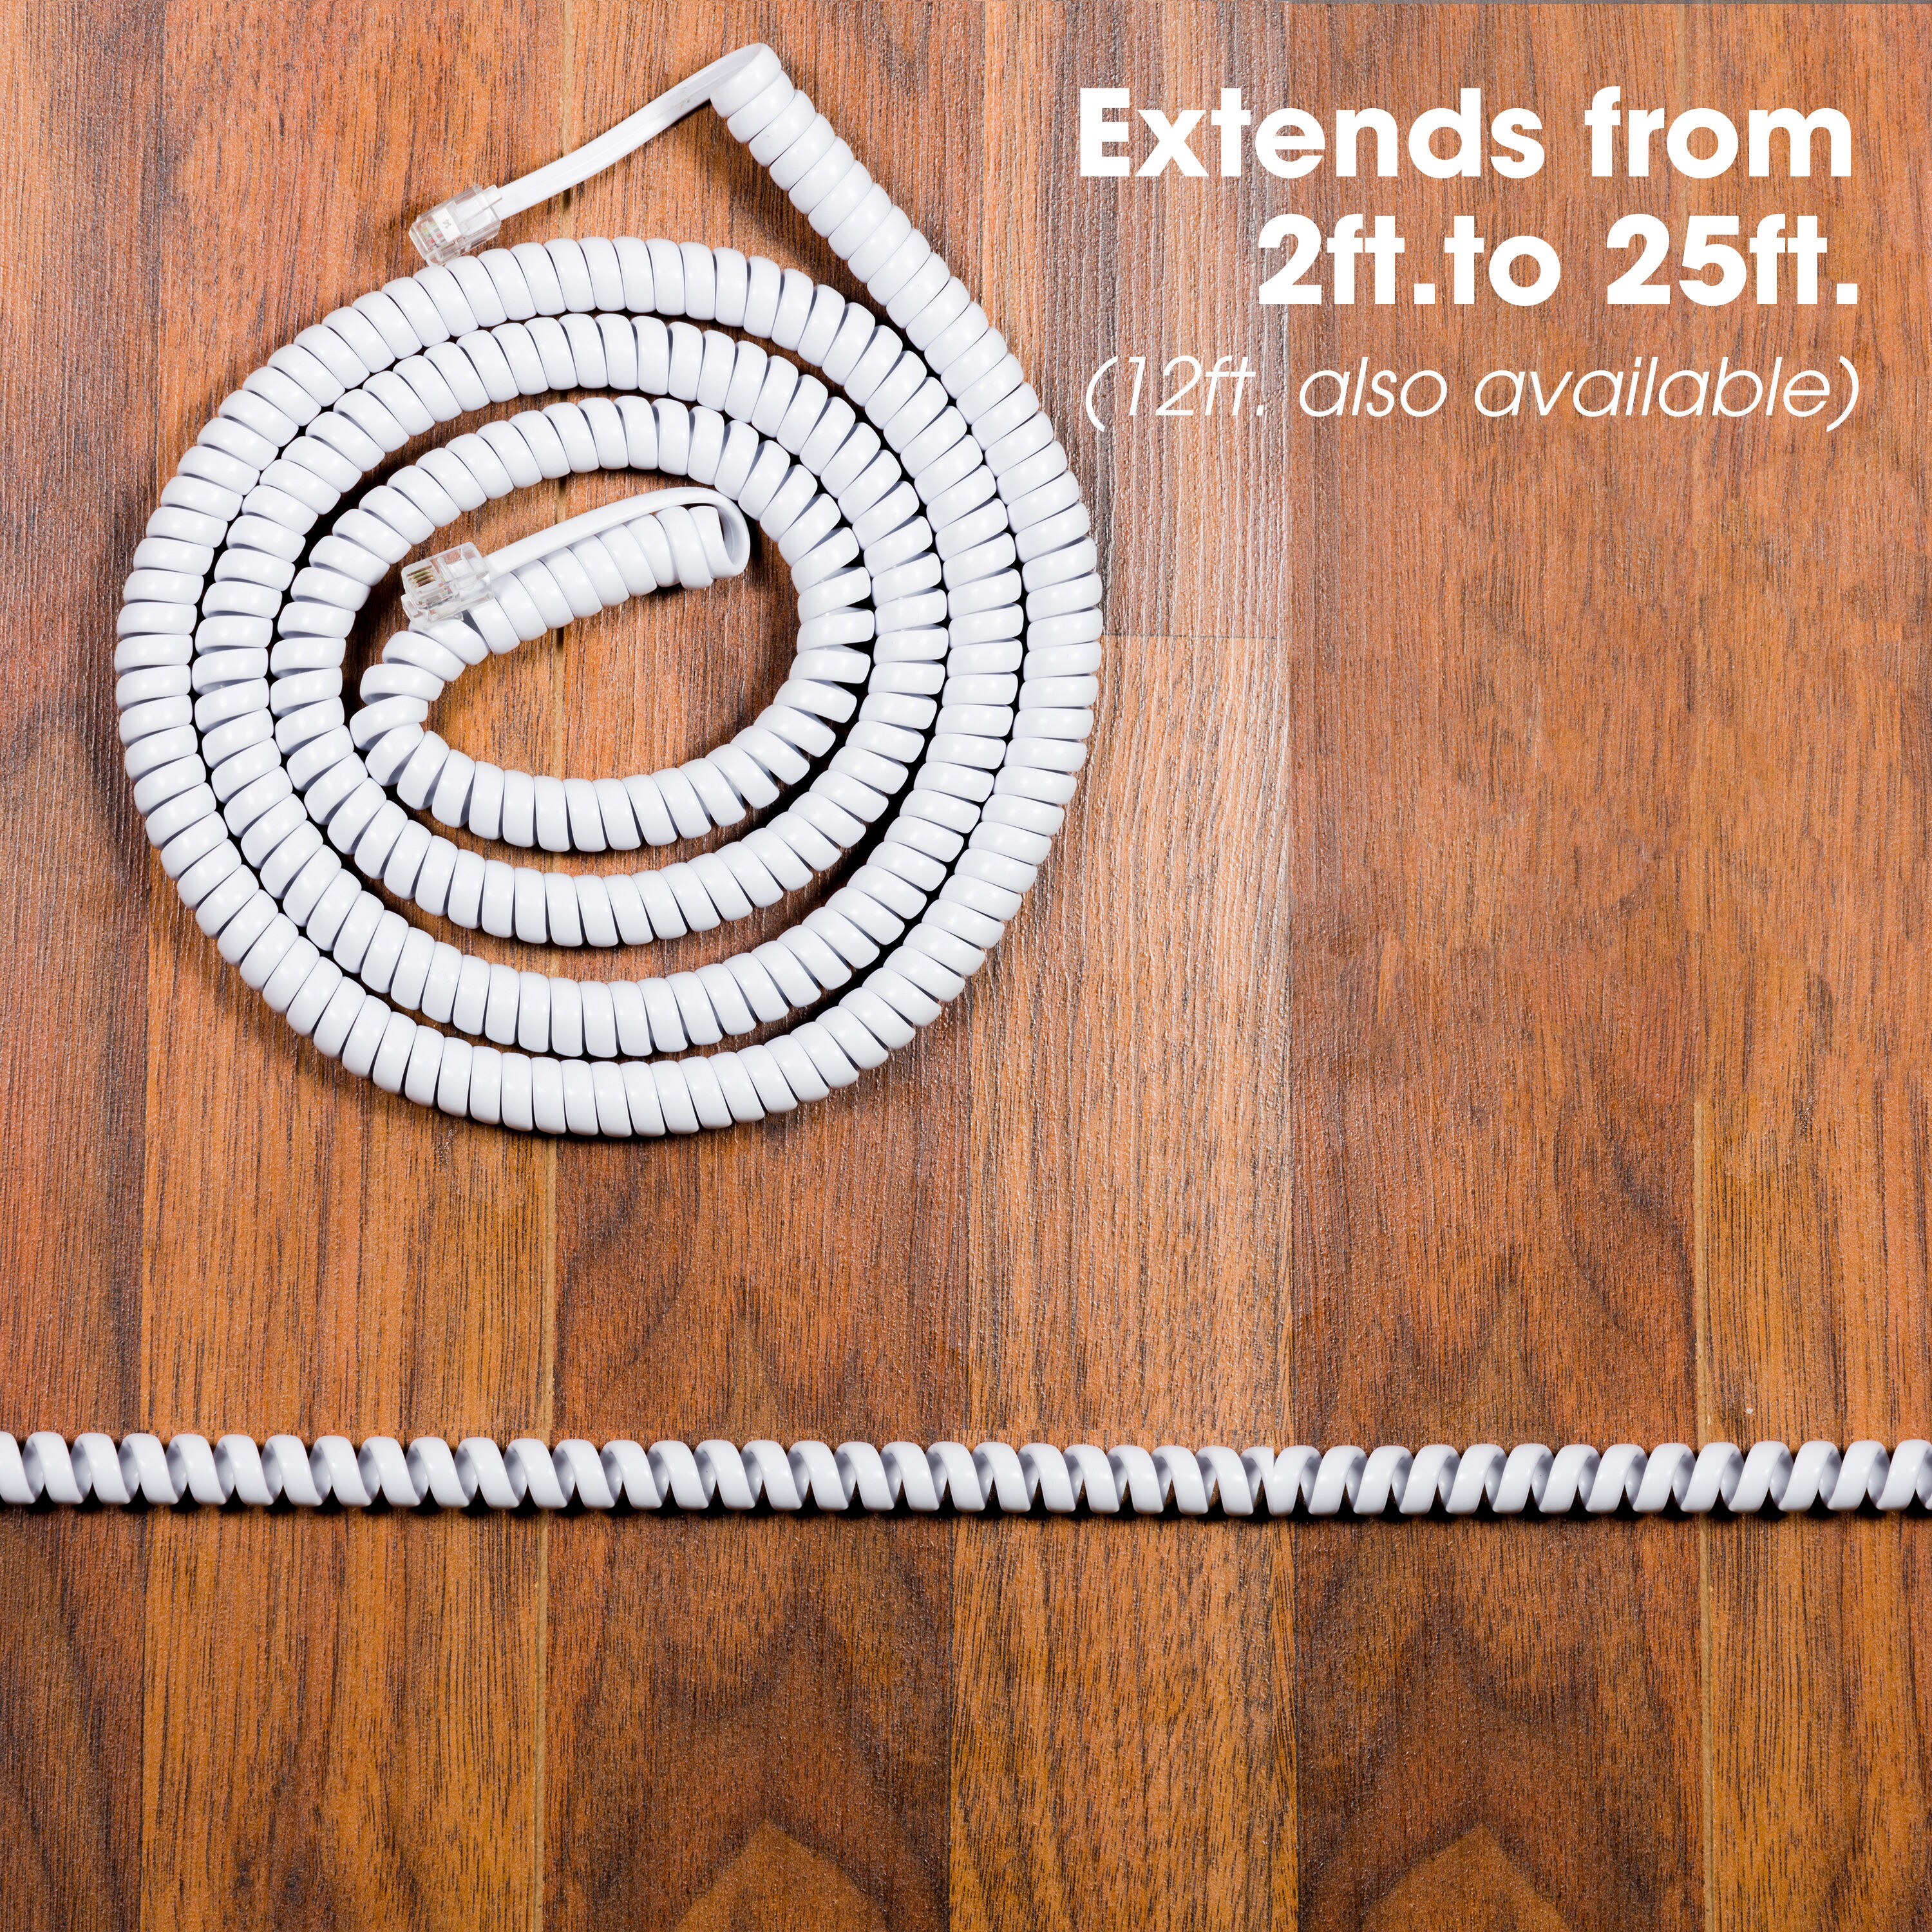 for Use in Home or Office 2 Pack 46081 Phone Cord Works with All Corded Landline Phones Power Gear Coiled Telephone Cord 25 Feet White 